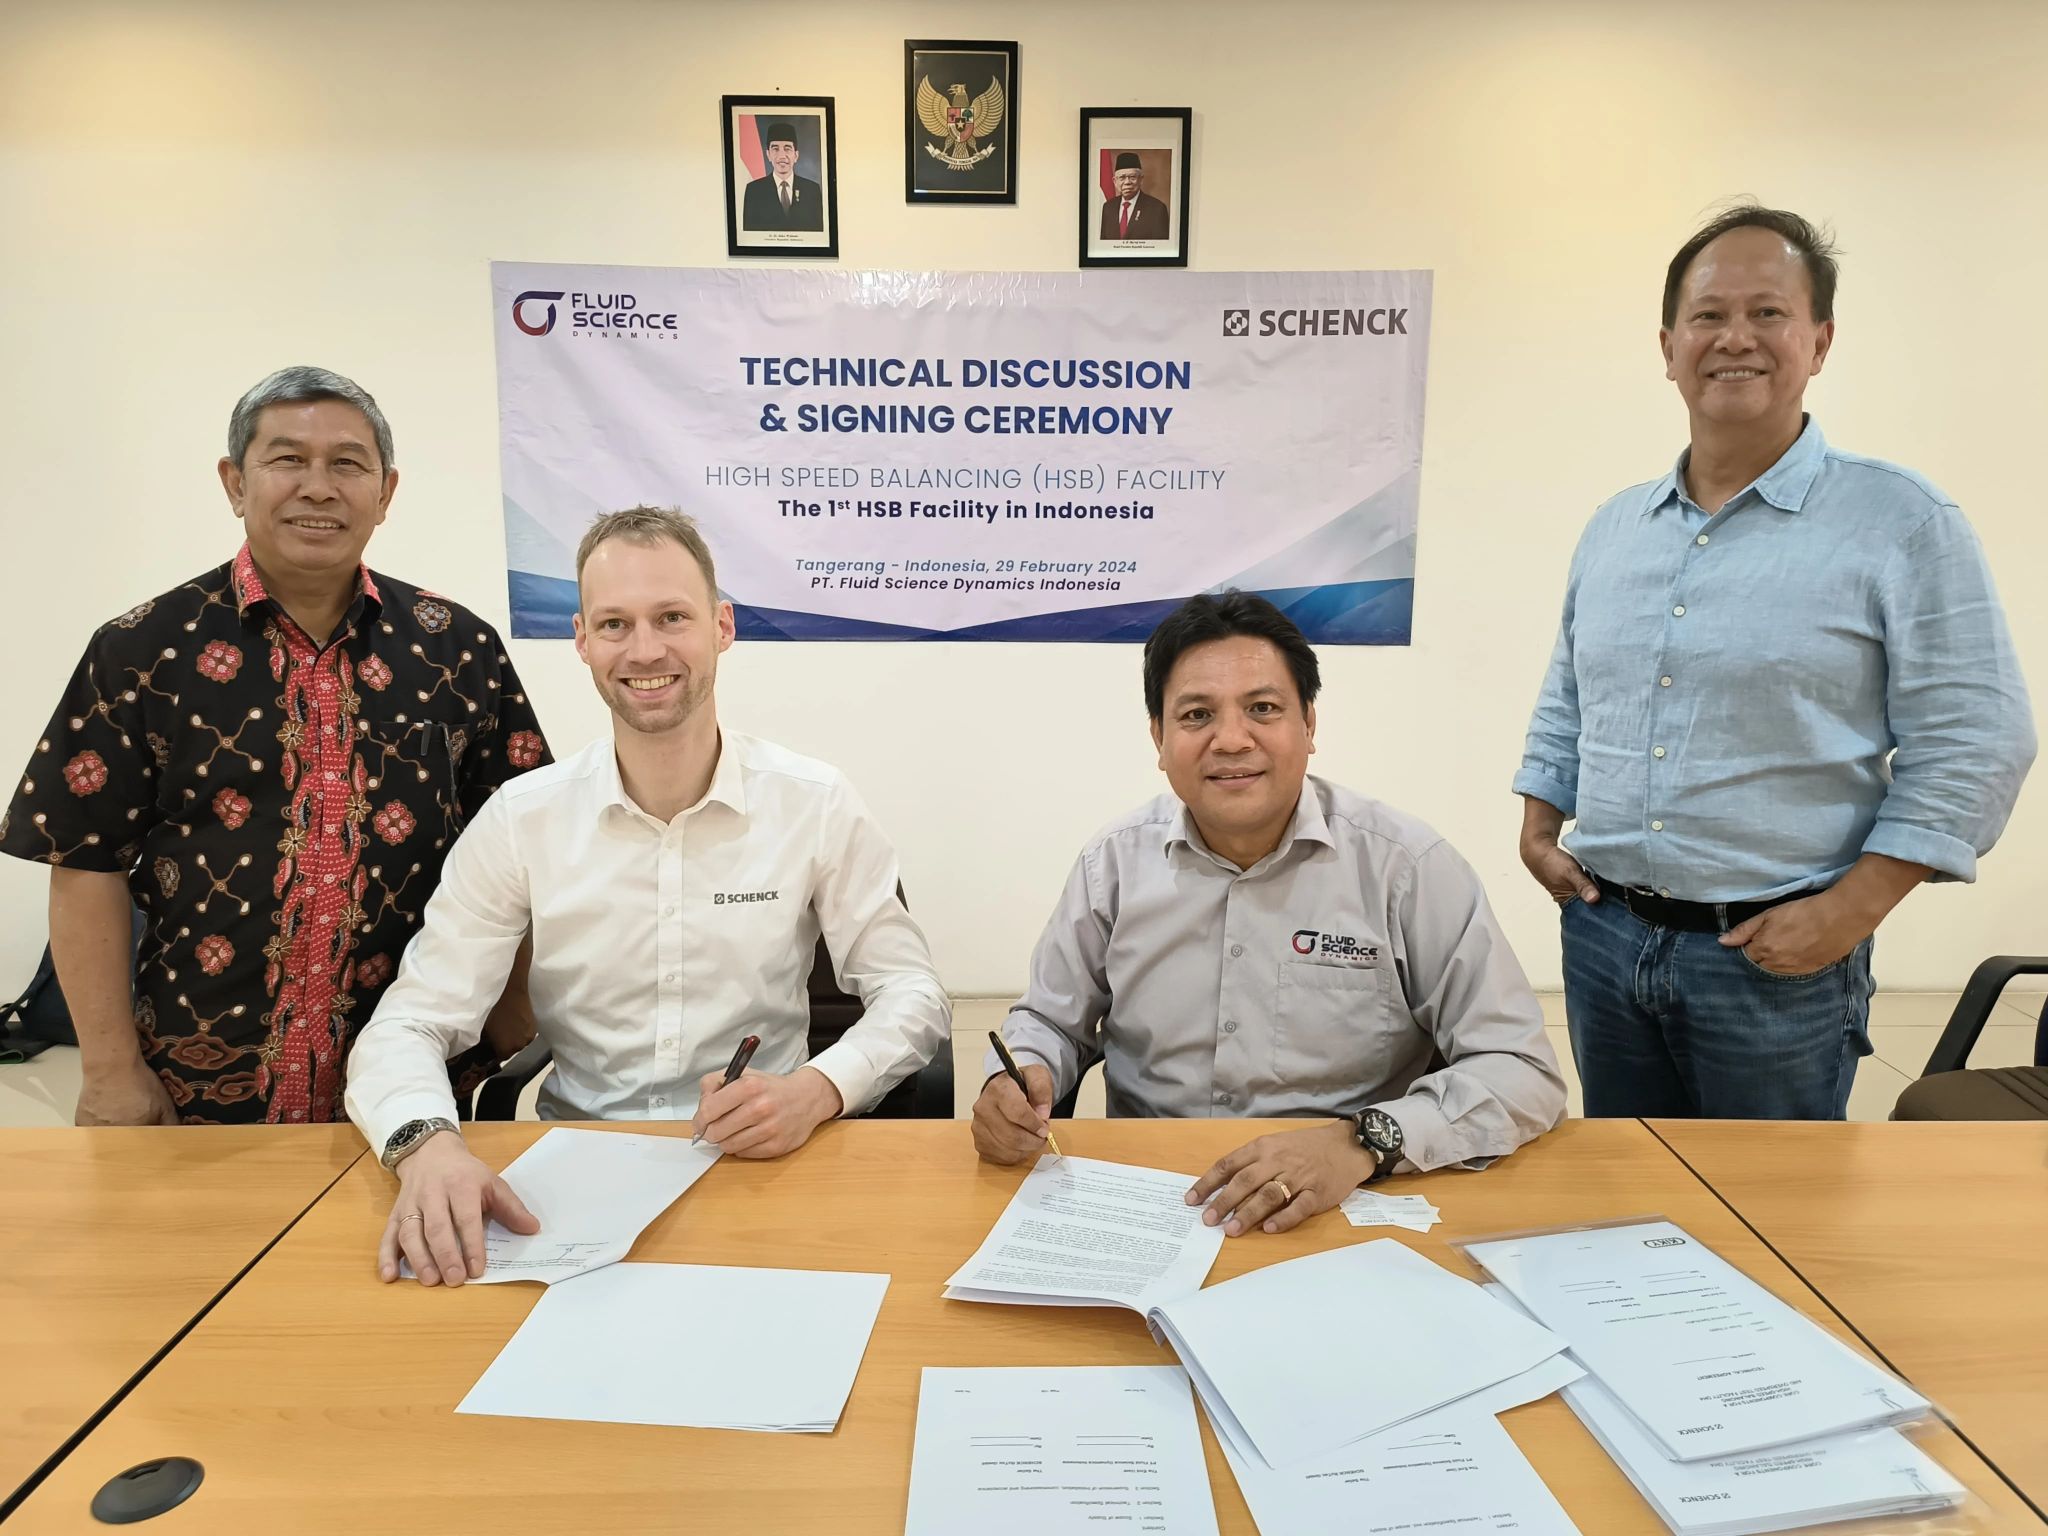 Today, 29 February 2024, FSD Group represented by Rudiyanto Wijaya (Managing Director of PT Fluid Science Dynamics Indonesia), and Schenck Germany represented by Mr. Tobias Wilhelmi, M.Sc

 
(Global Sales Manager) signing Sales & Purchase Agreement for the purchase of 1 unit of High Speed Balancing (HSB).

The HSB will be installed in FSD Indonesia and will become the 1st HSB equipment in the SEA region.

This project marks an important milestone for FSD Group and strengthens our core business in providing services to Rotating Equipment/Turbomachinery.

FSD Group Chairman Mr. Laurence Wai was also witness the signing ceremony.